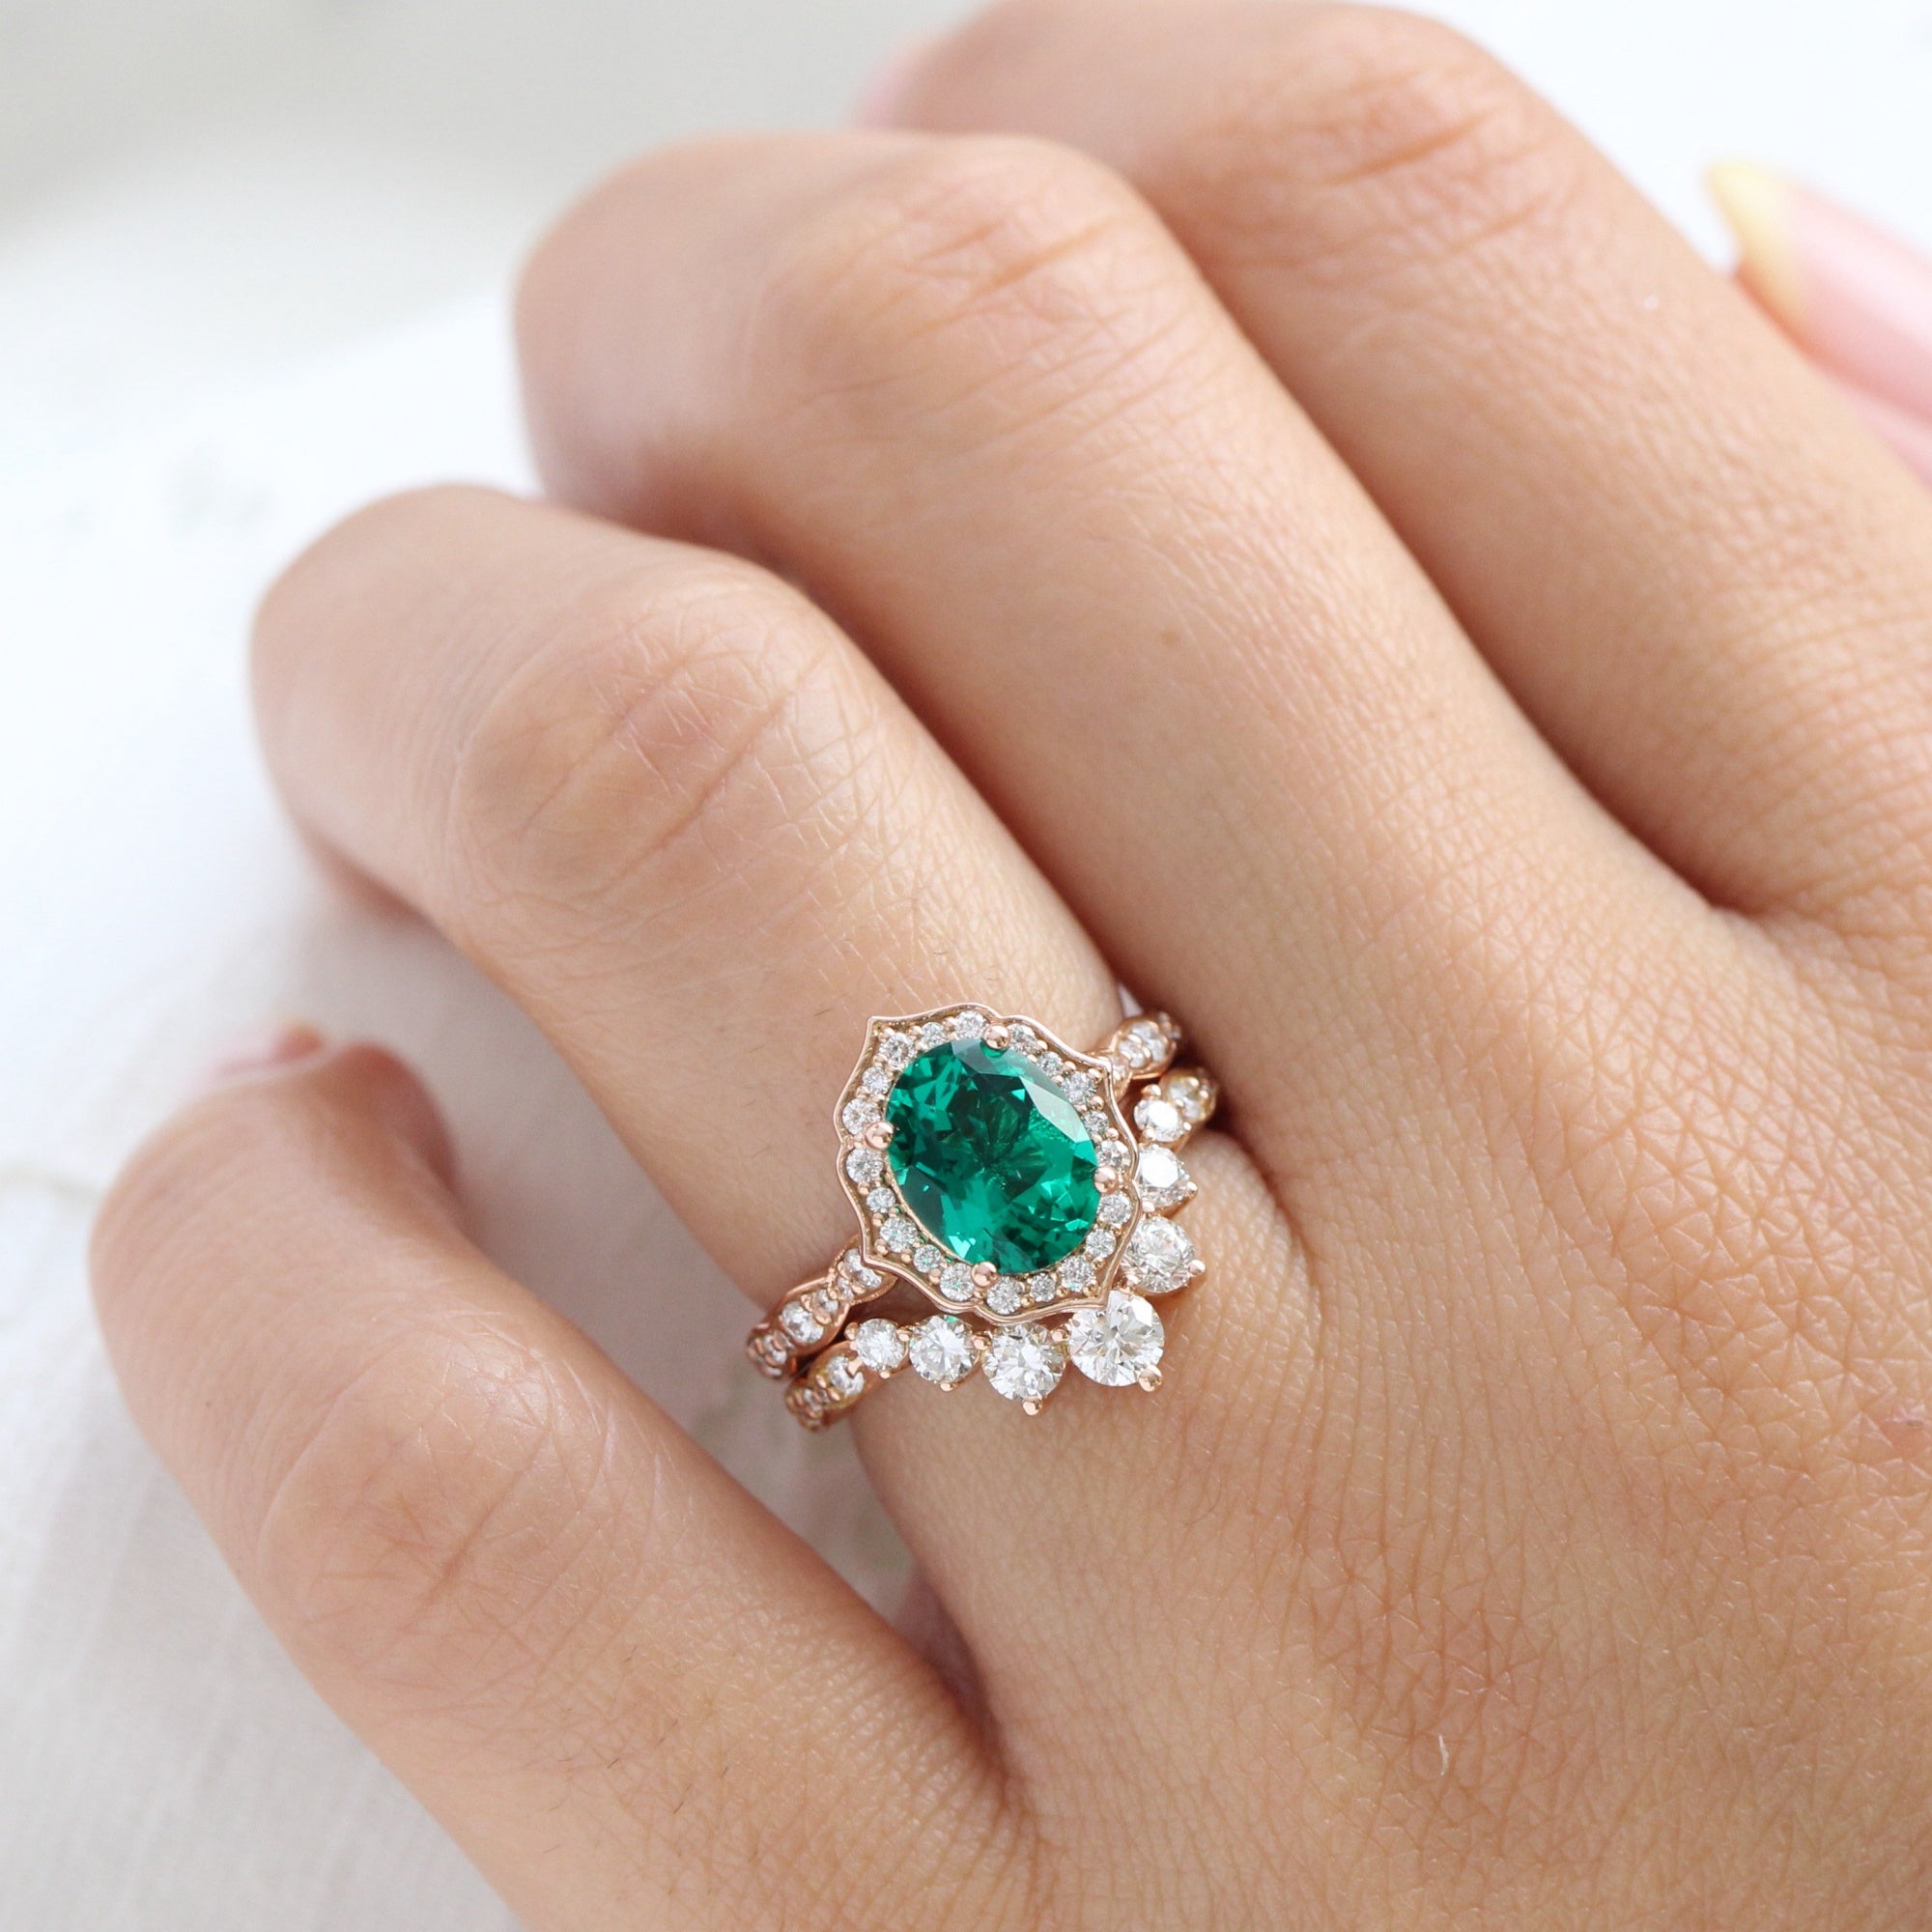 9ct Yellow Gold Oval Emerald And Diamond Ring | My Jewellery Shop